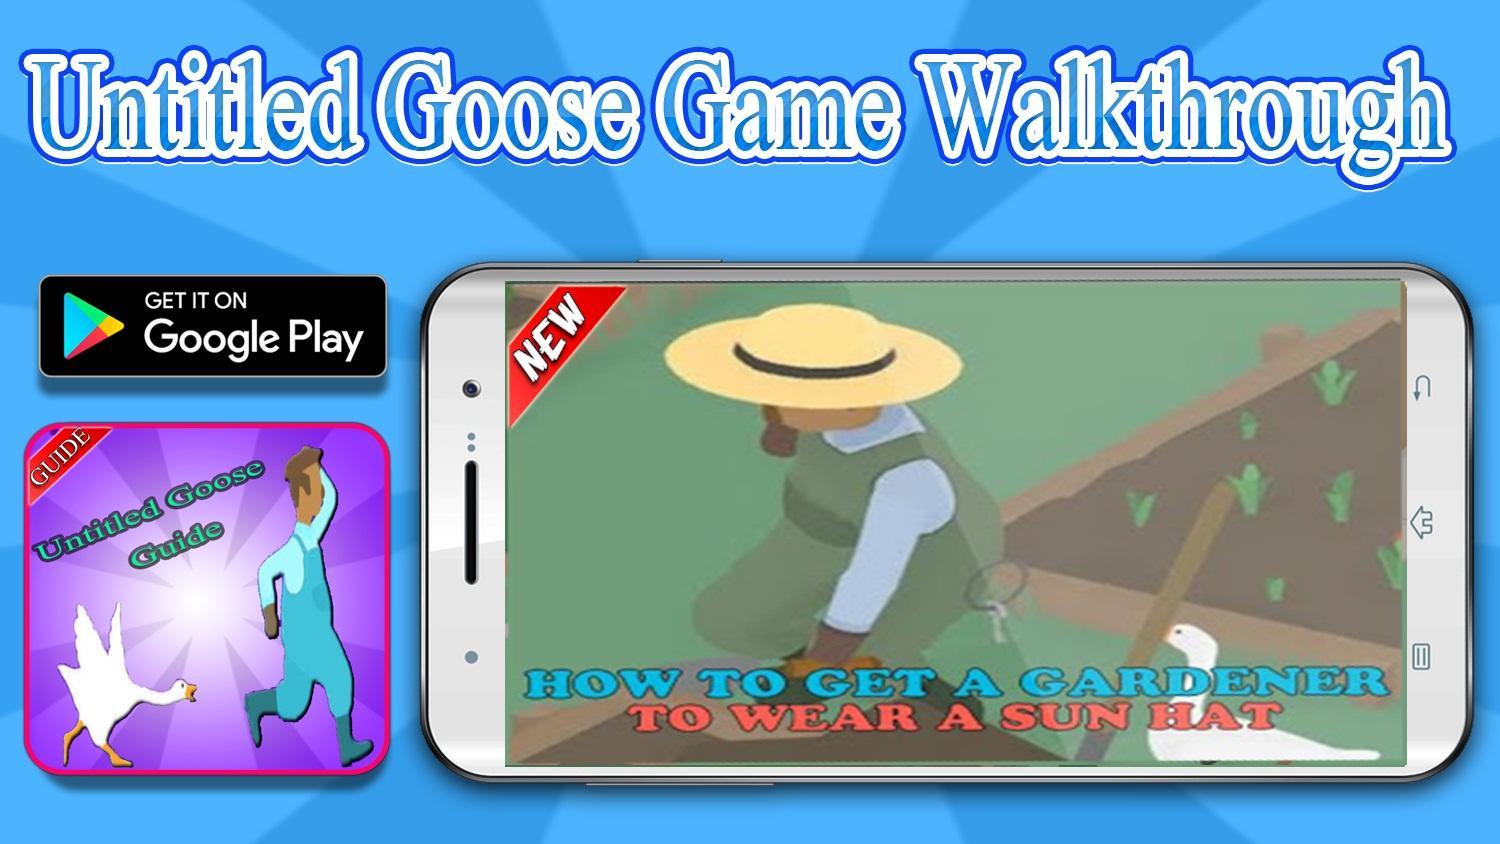 Guide For Untitled Goose Game 2020 🦆 for Android - APK Download